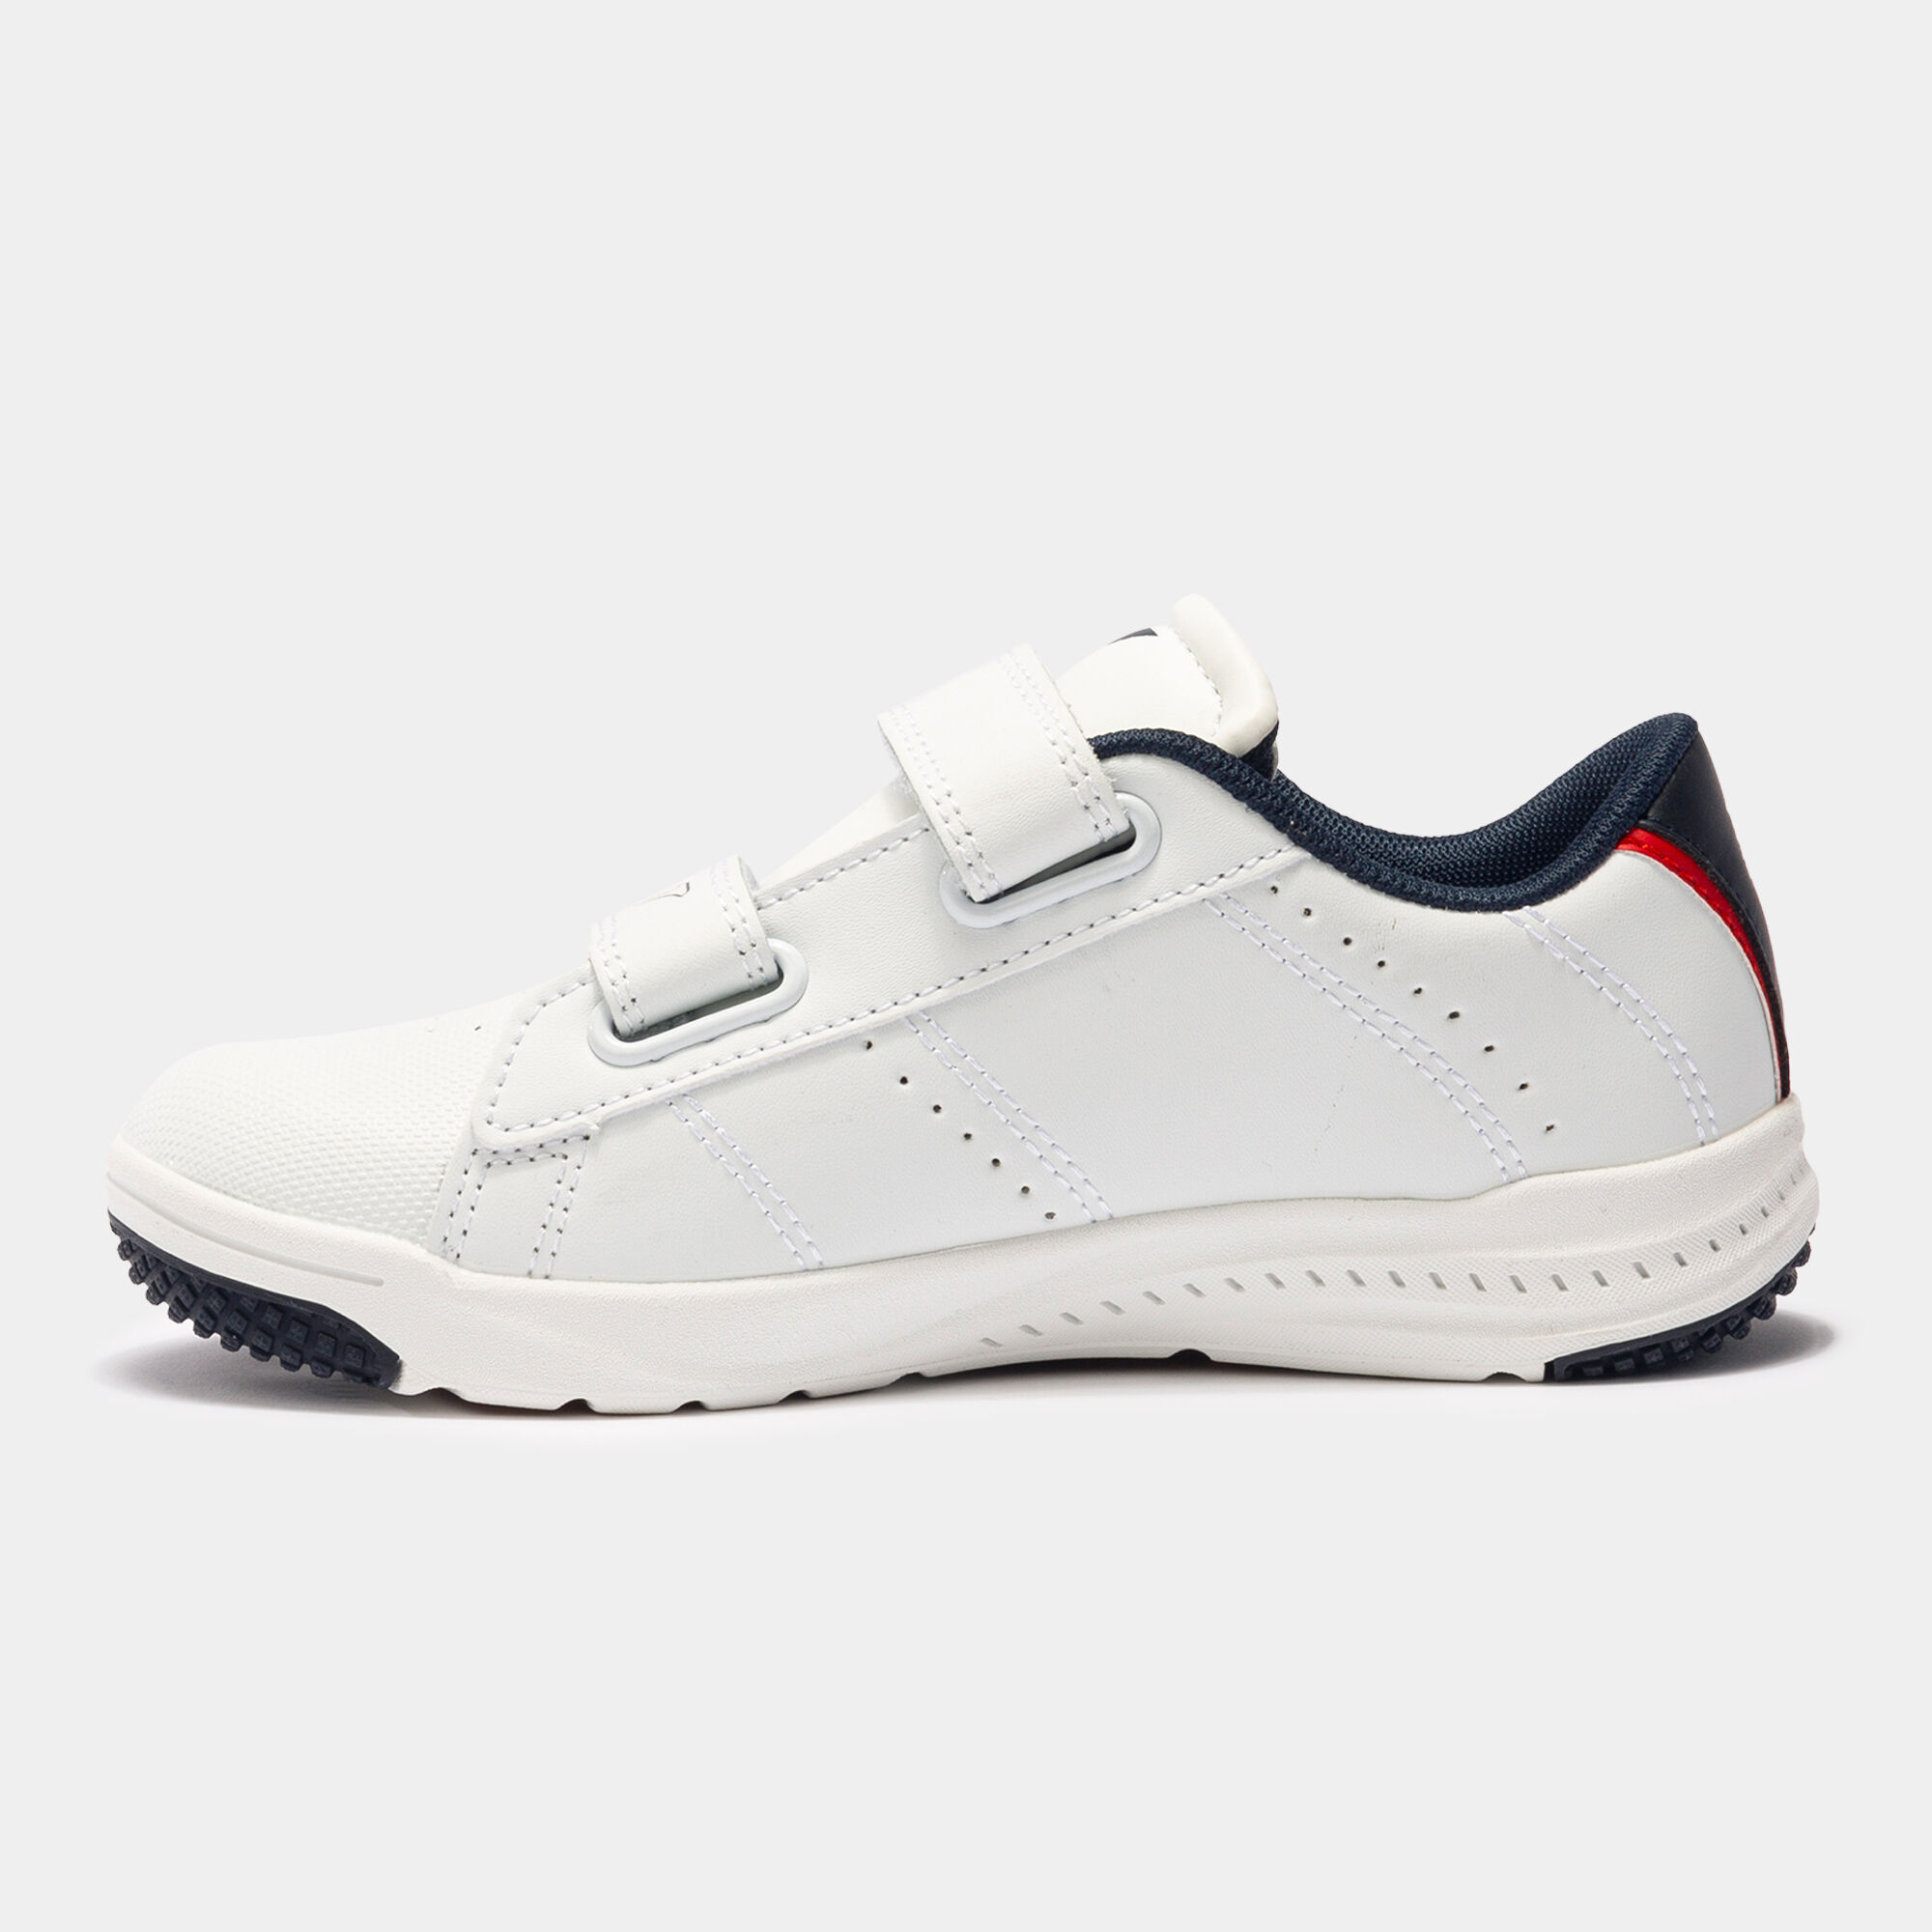 CHAUSSURES CASUAL PLAY 22 JUNIOR BLANC ROUGE